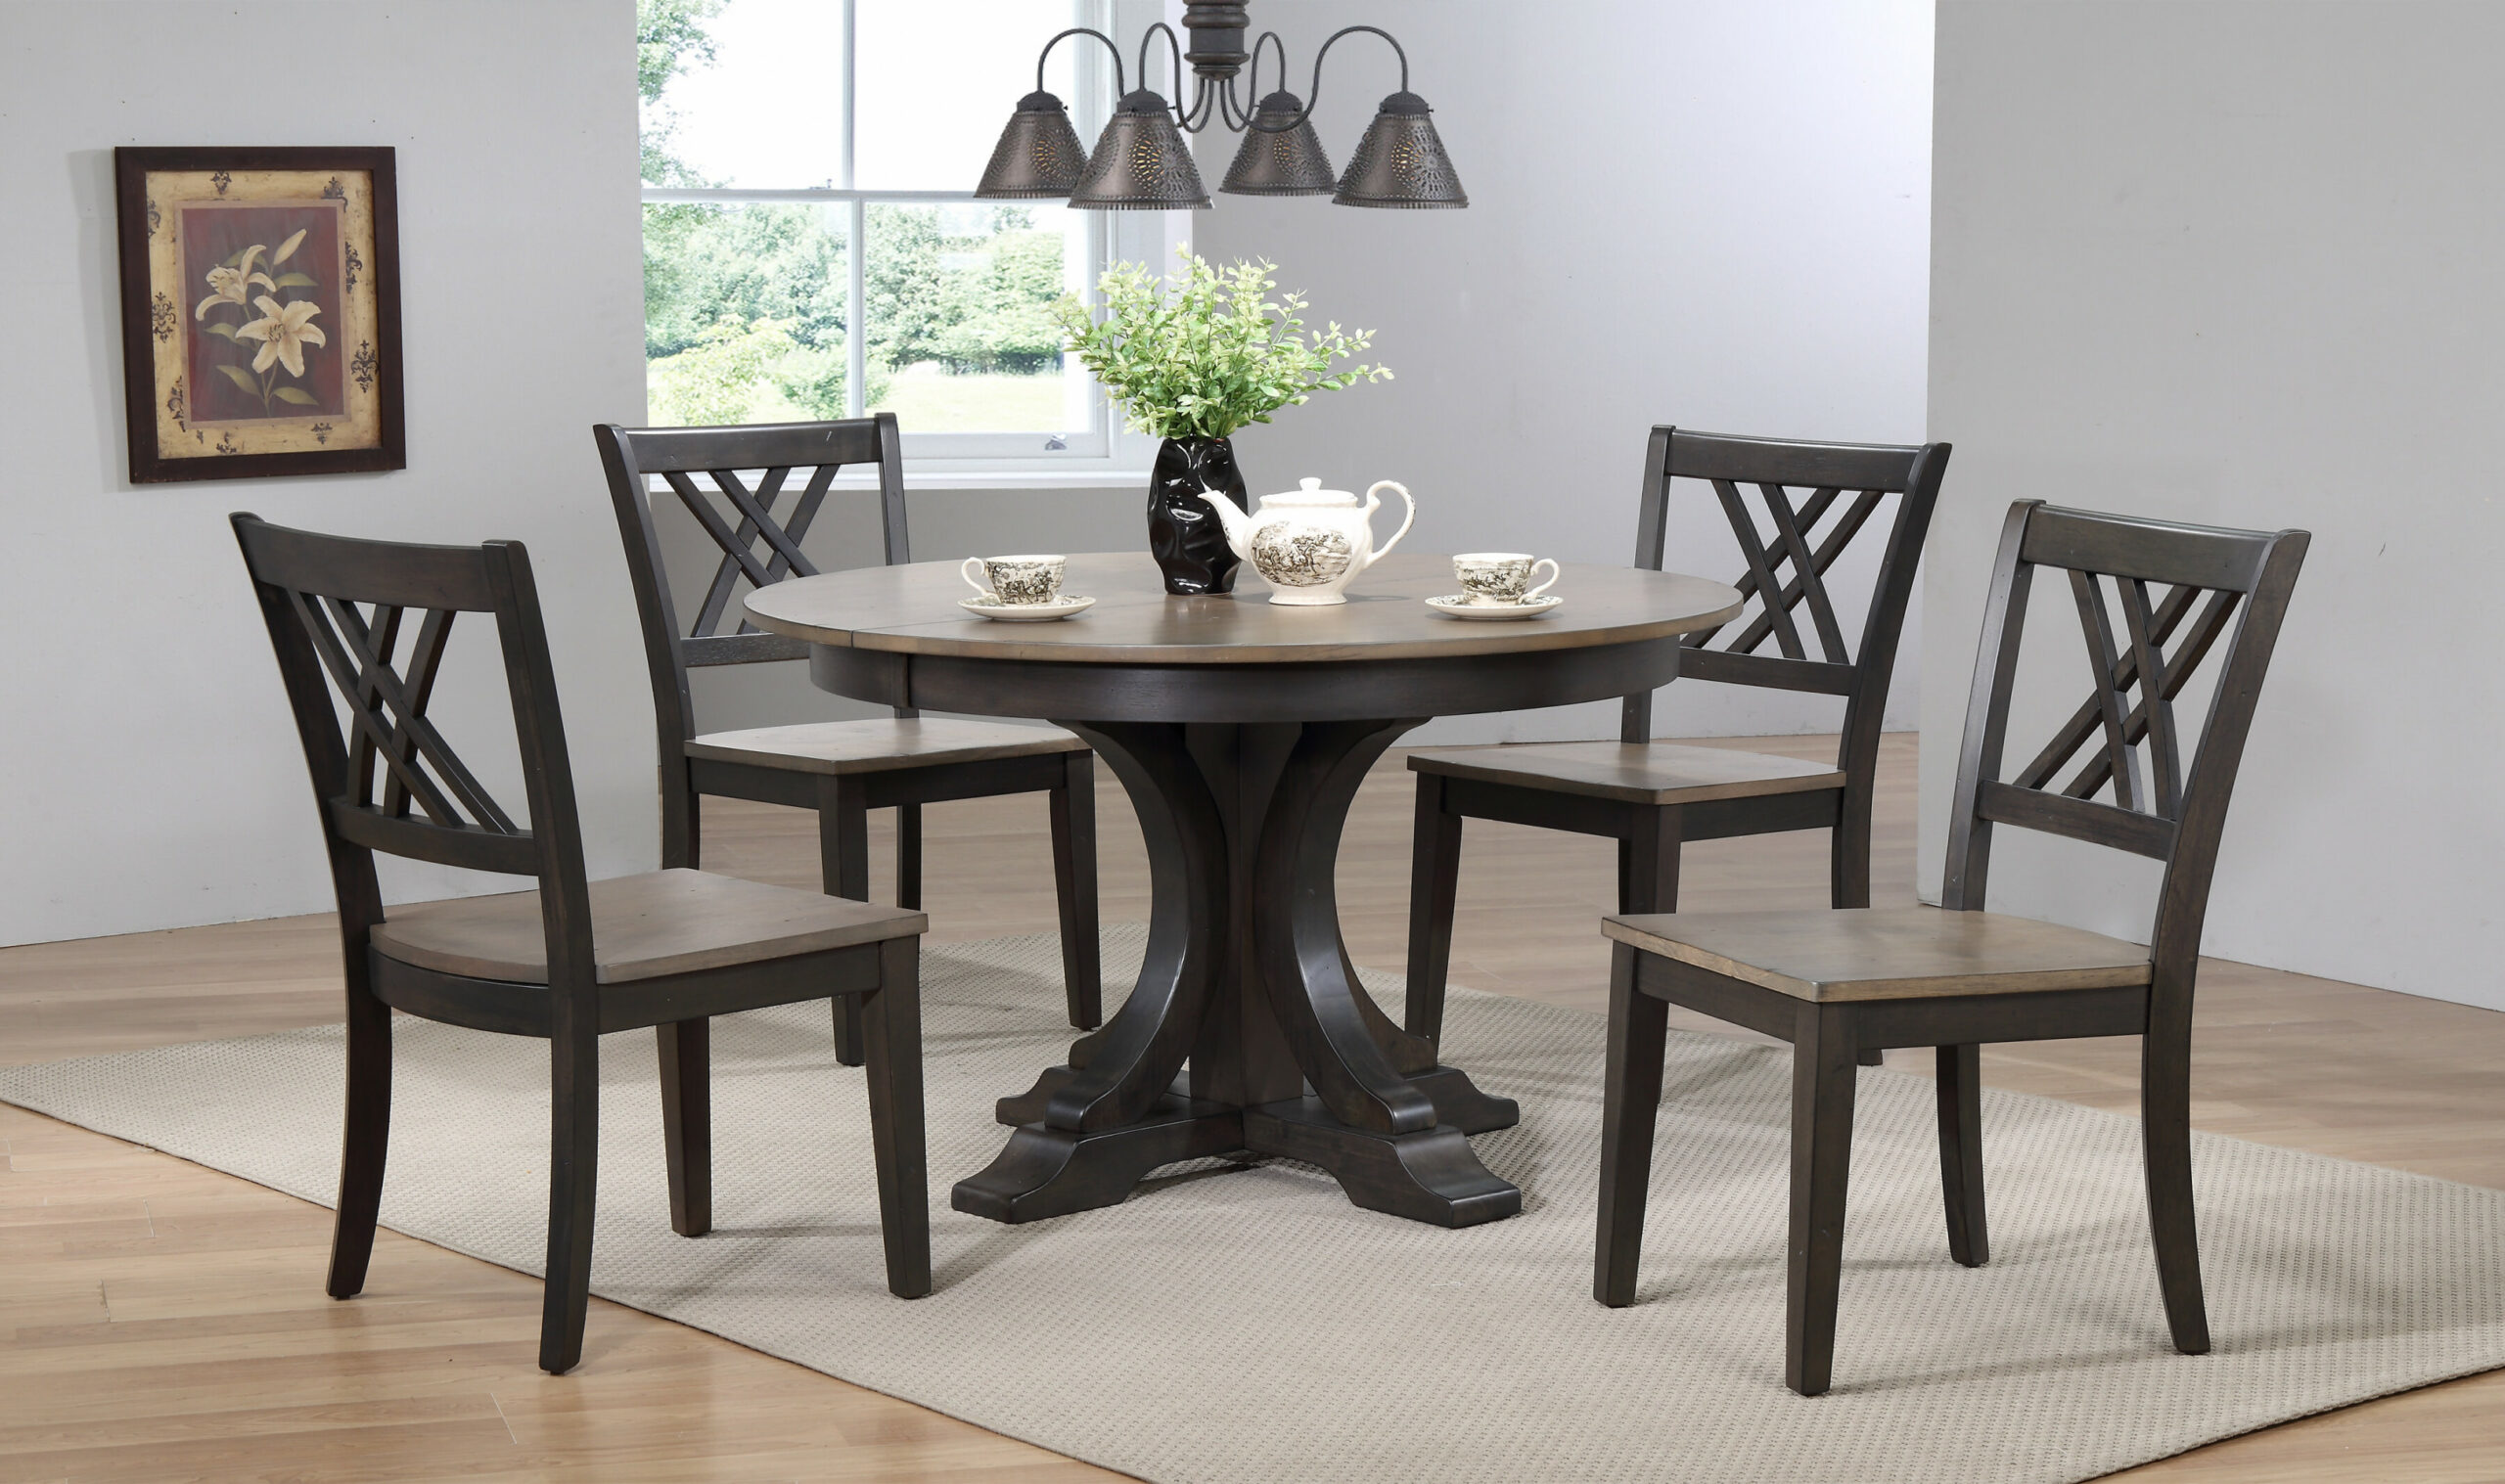 wayfair kitchen table and 4 chair